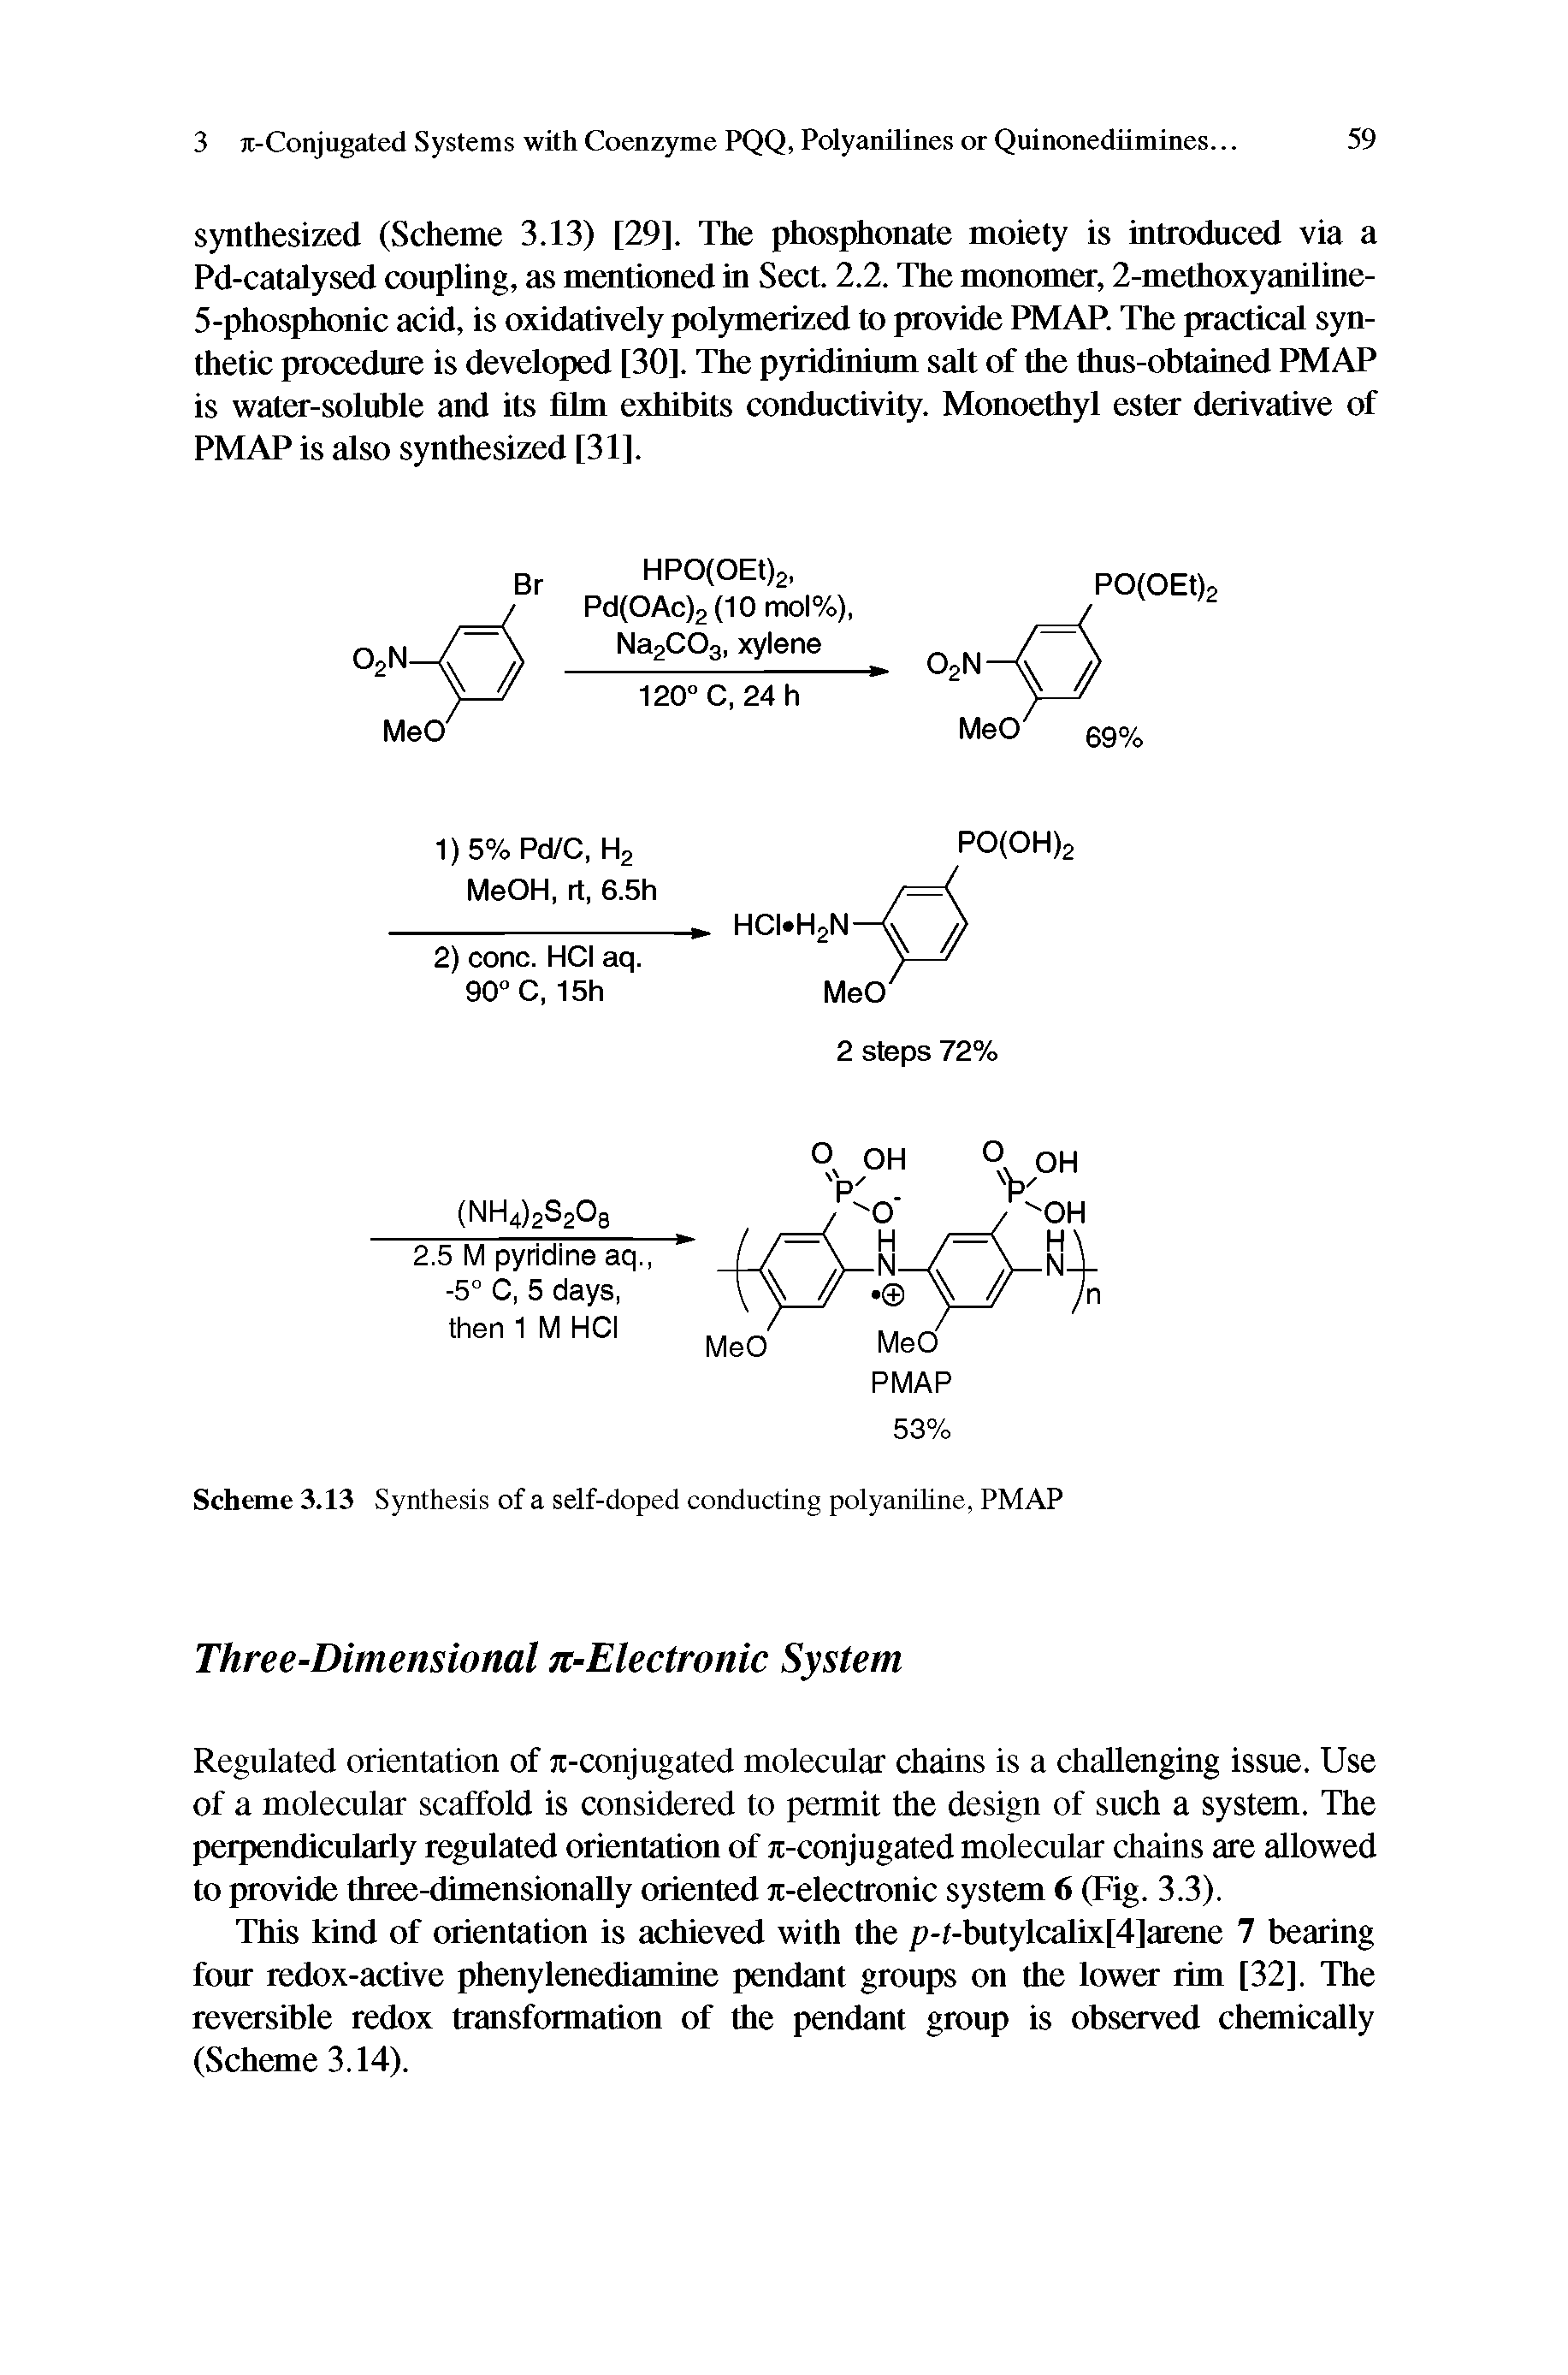 Scheme 3.13 Synthesis of a self-doped conducting polyaniline, PMAP...